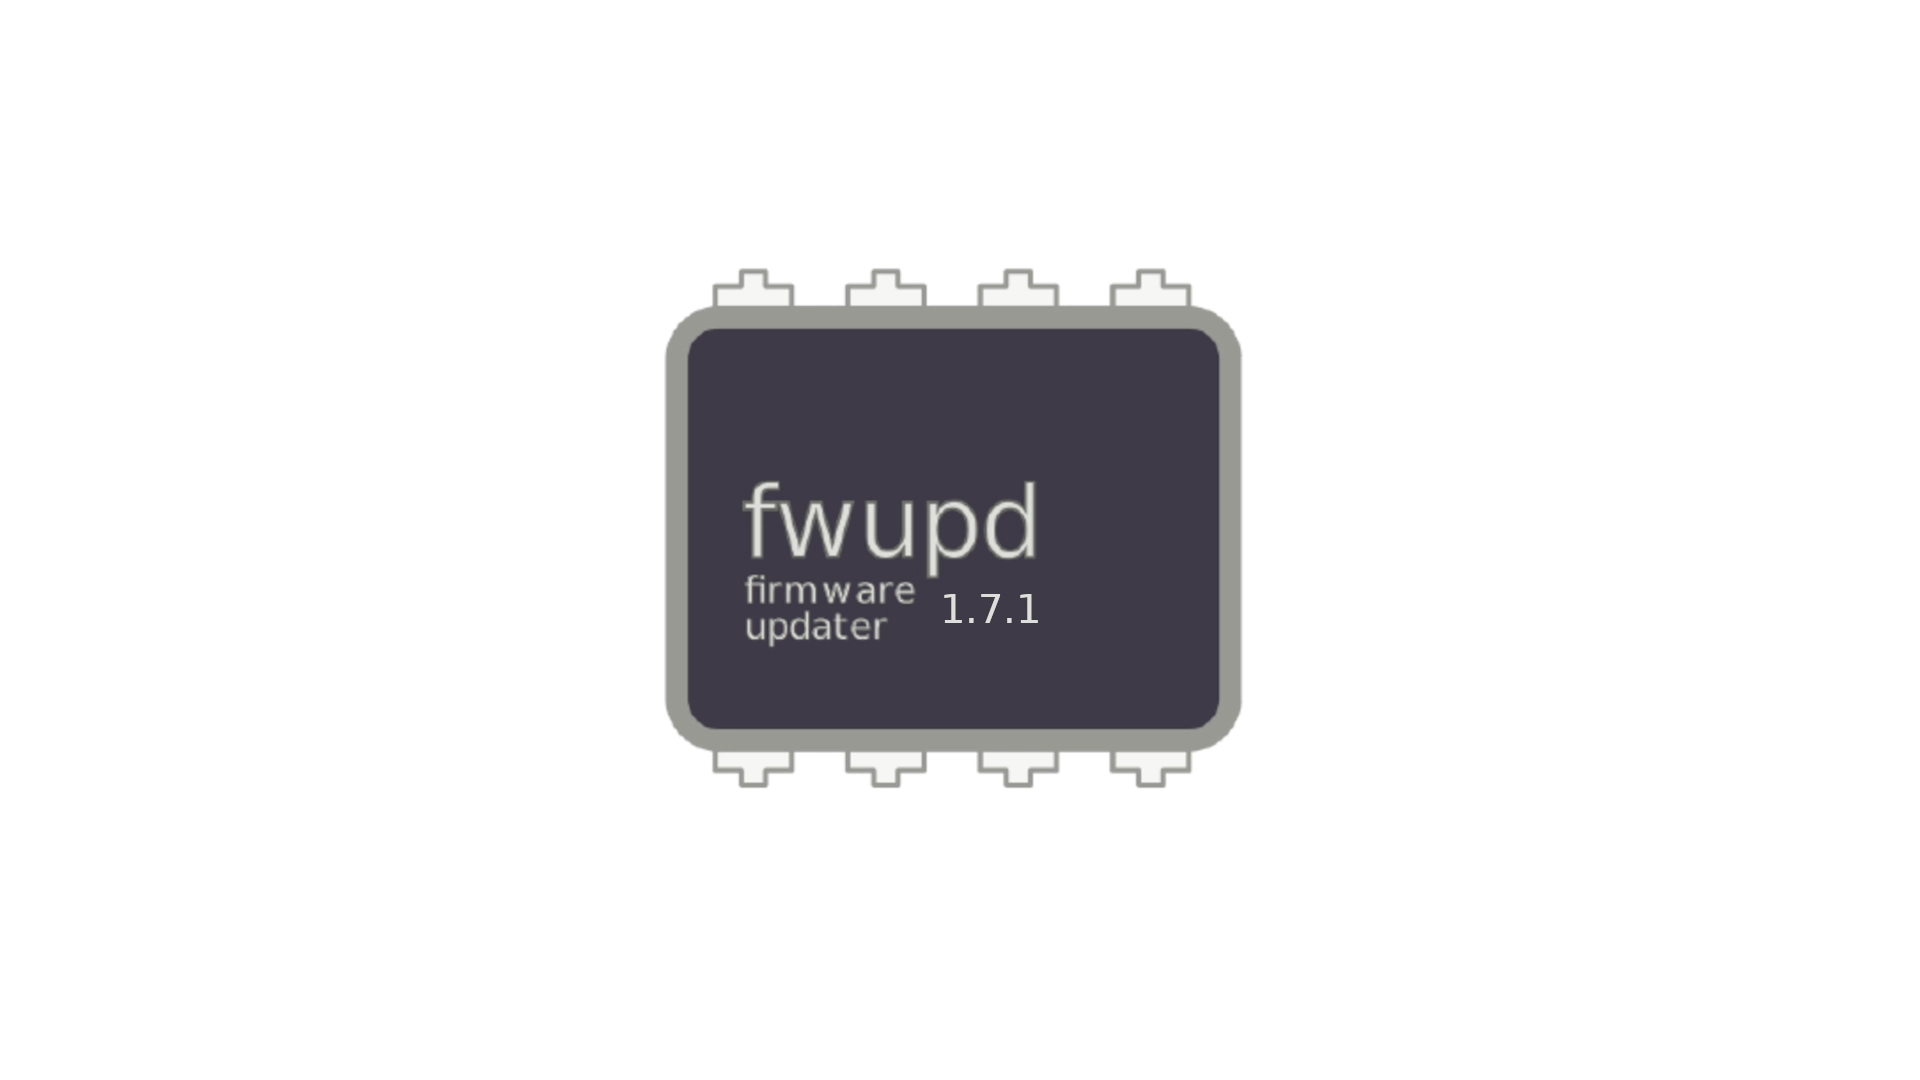 Fwupd 1.7.1 Released with Support for Dell Atomic Dock, Steelseries Stratus Controller